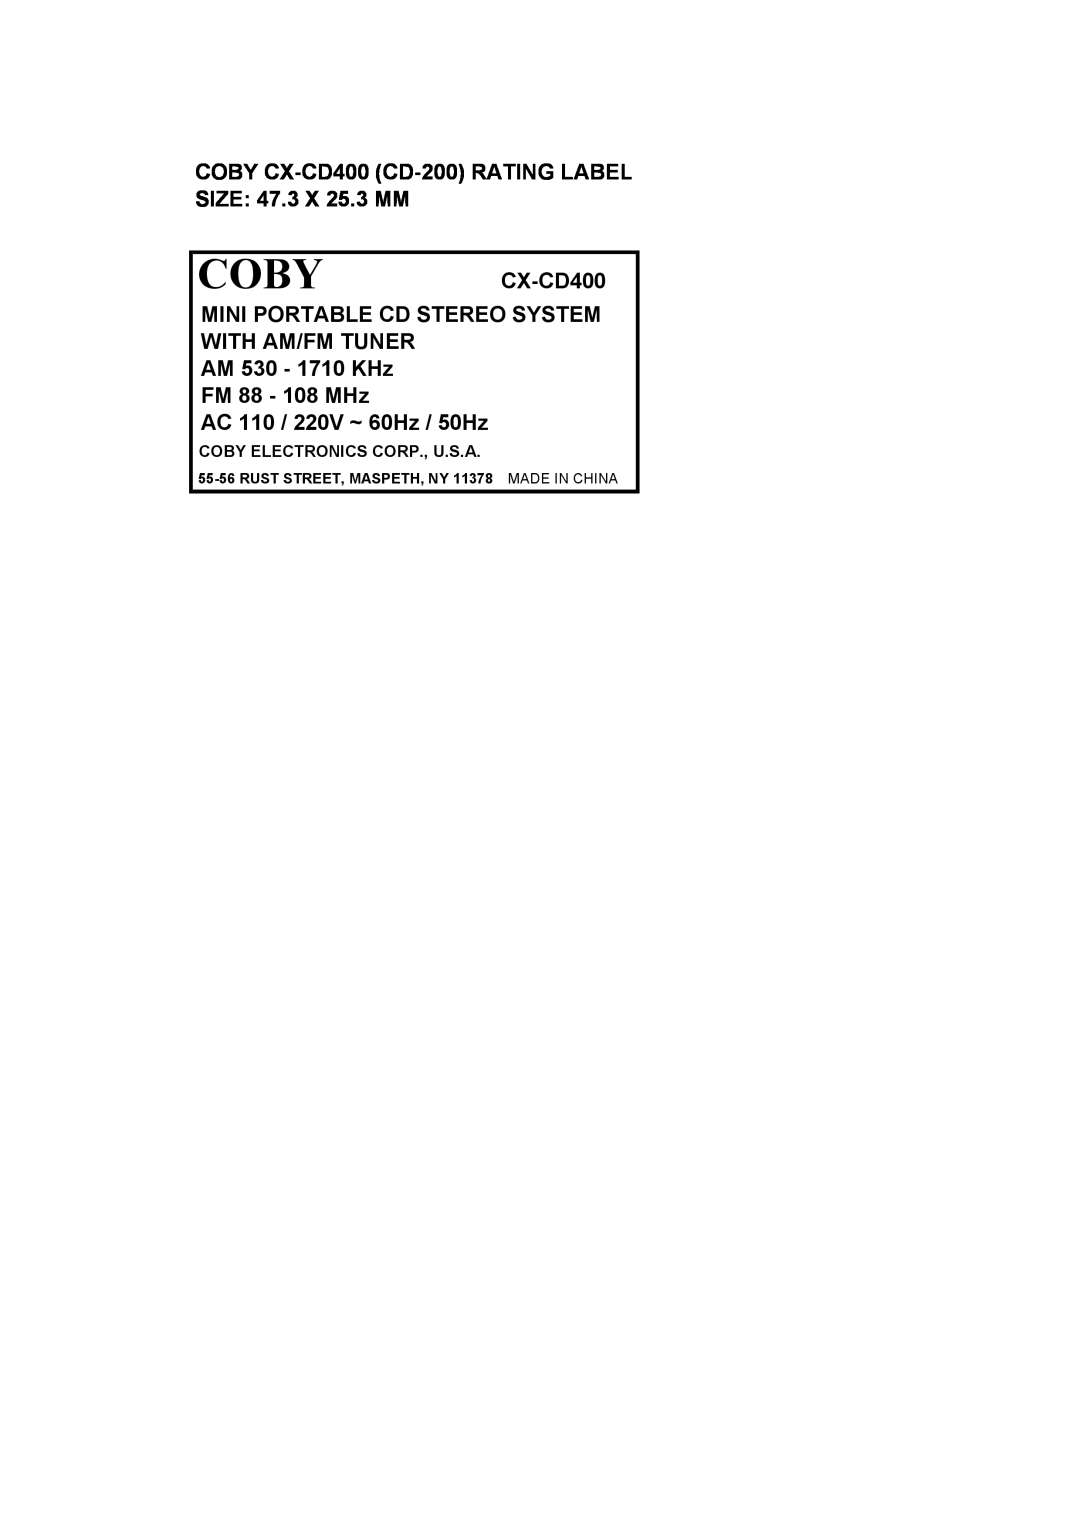 COBY electronic CX-CD400 Coby, Mini Portable Cd Stereo System With Am/Fm Tuner, AM 530 - 1710 KHz FM 88 - 108 MHz 